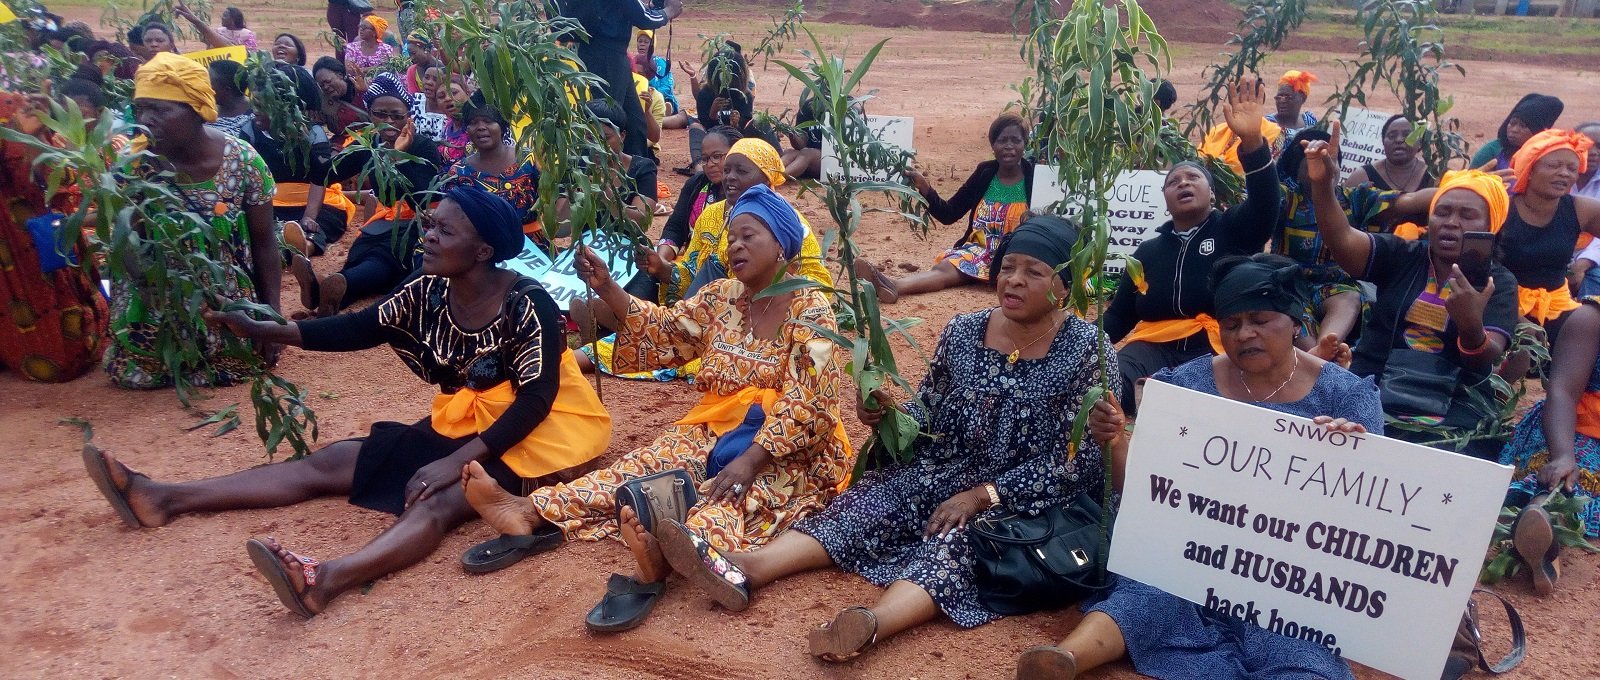 Women from the North West Region of Cameroon gathered on 7 September 2018 to call for an end to the conflict that has resulted in many being killed and thousands displaced